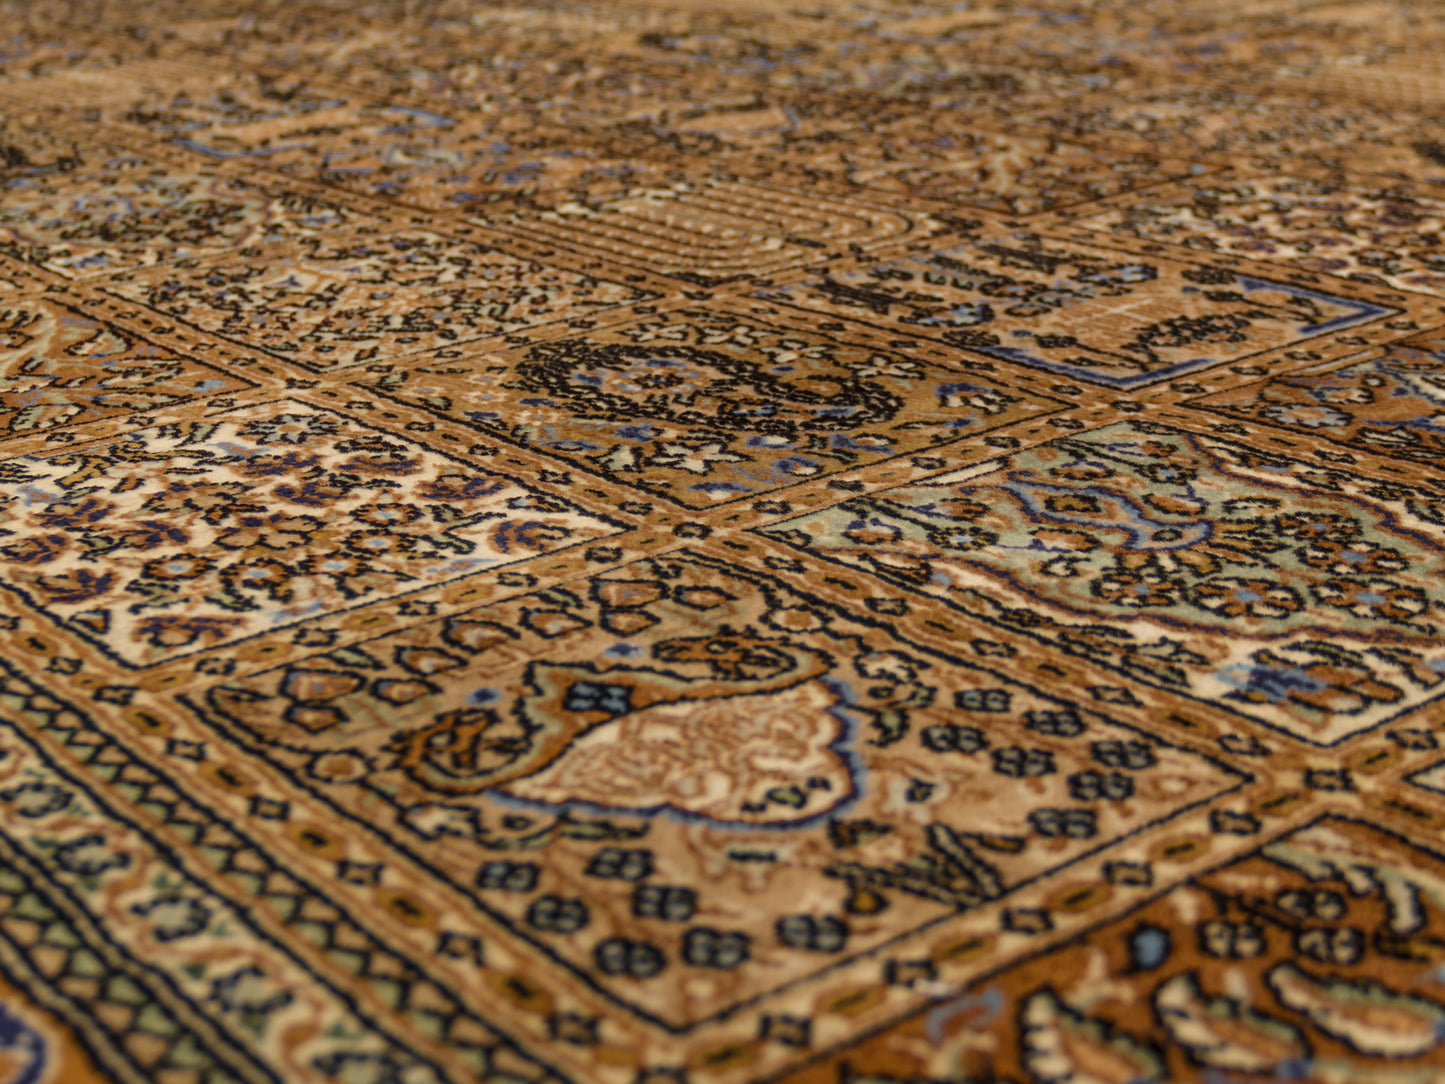 Hand-knotted Persian Wool Brown Rug "4 seasons" product image #29703128416426